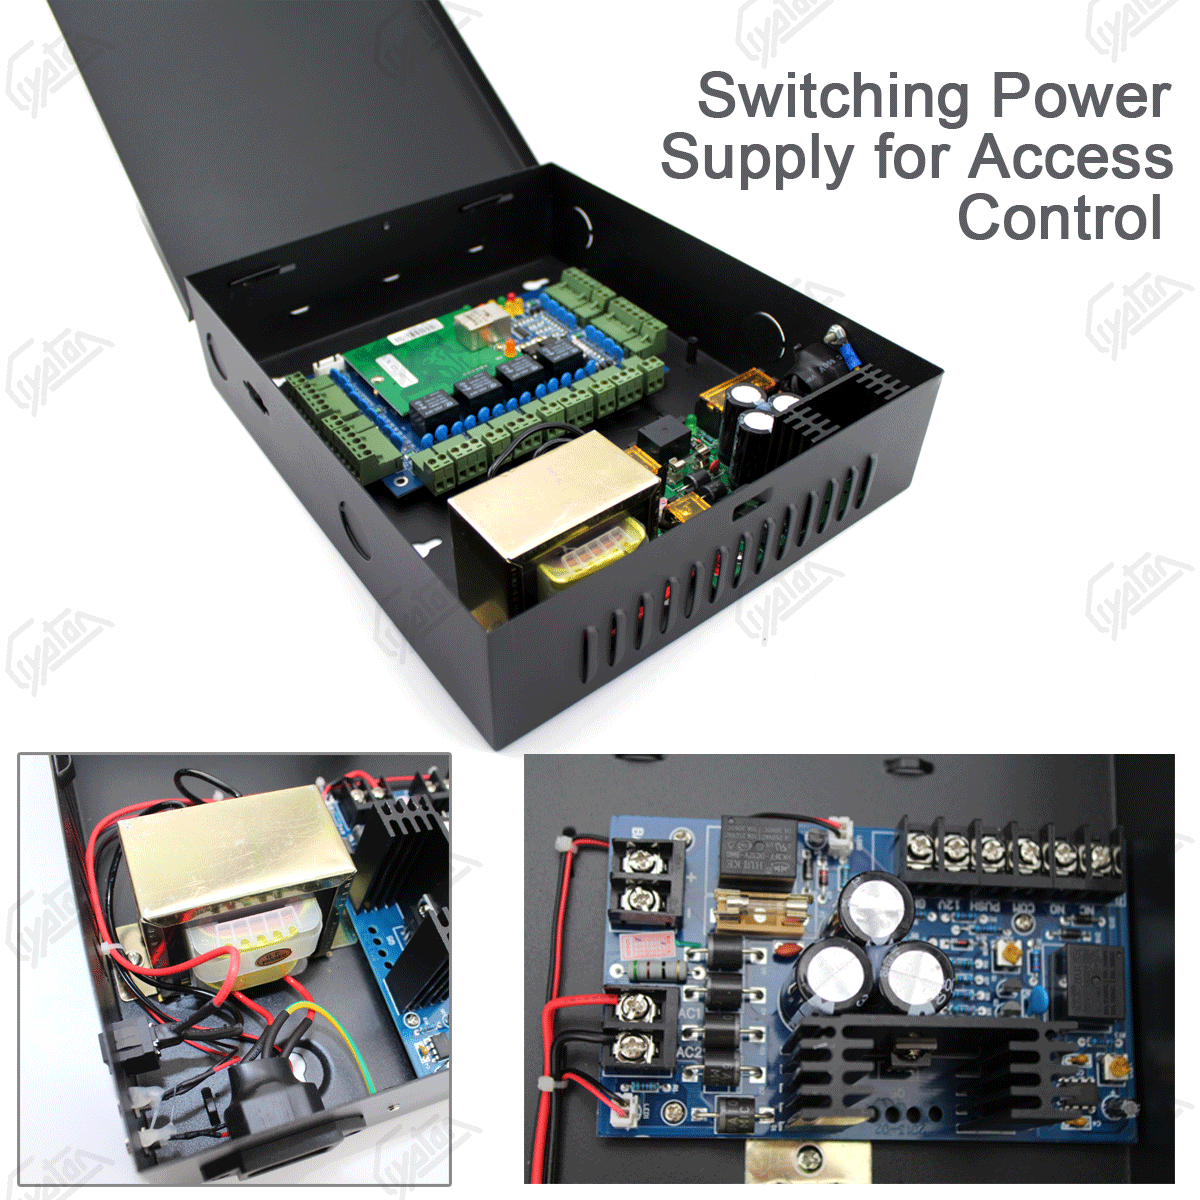 Power Supply Unit With Battery Back-up Connection for Access Control.jpg